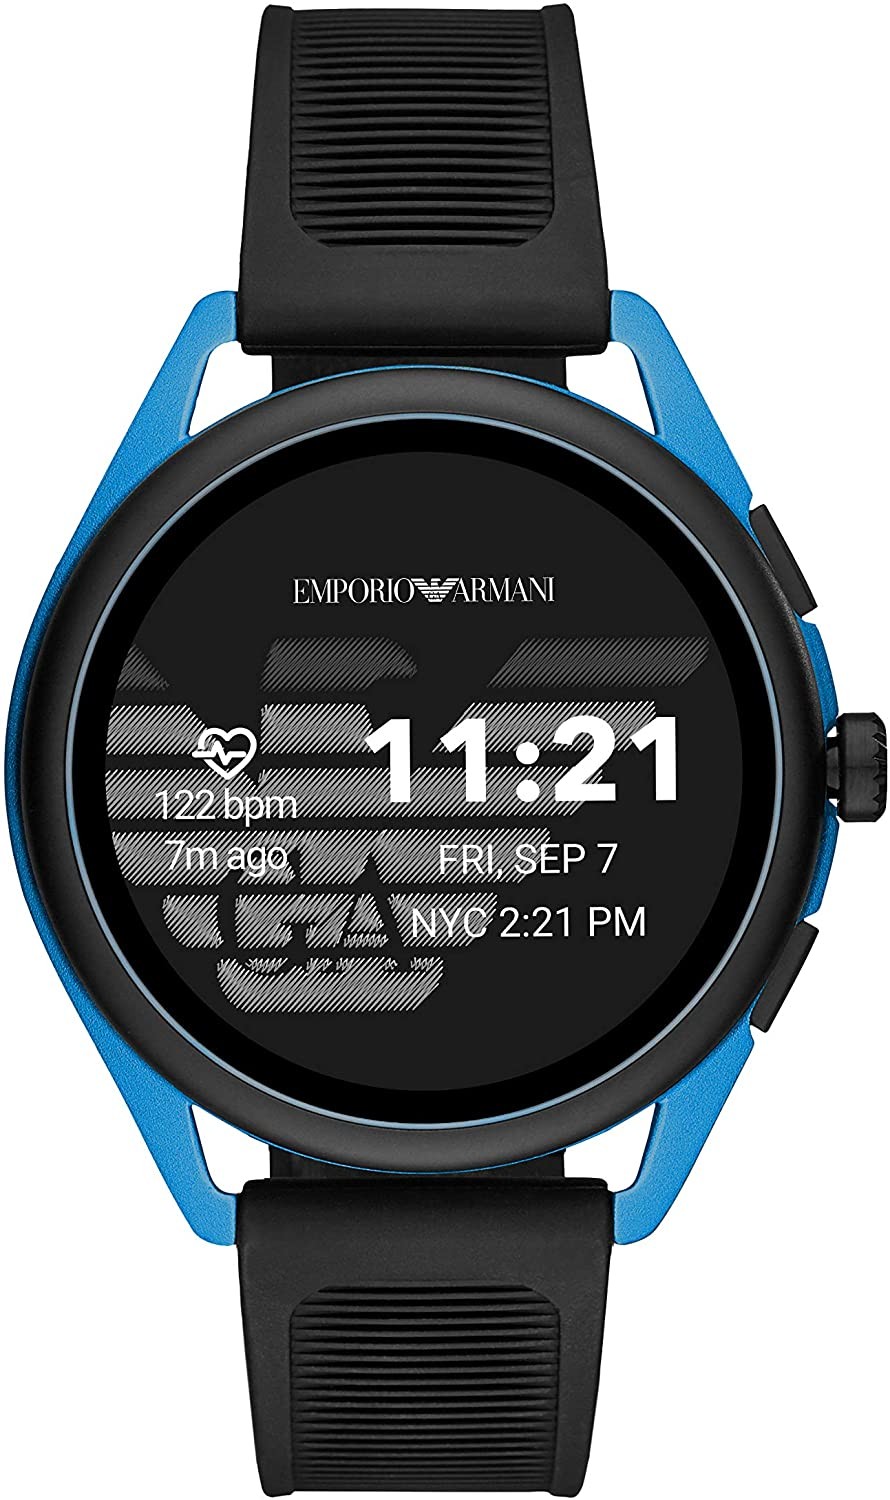 Emporio Armani Smartwatch 3- Powered with Wear OS by Google with Speaker, Heart Rate, GPS, NFC